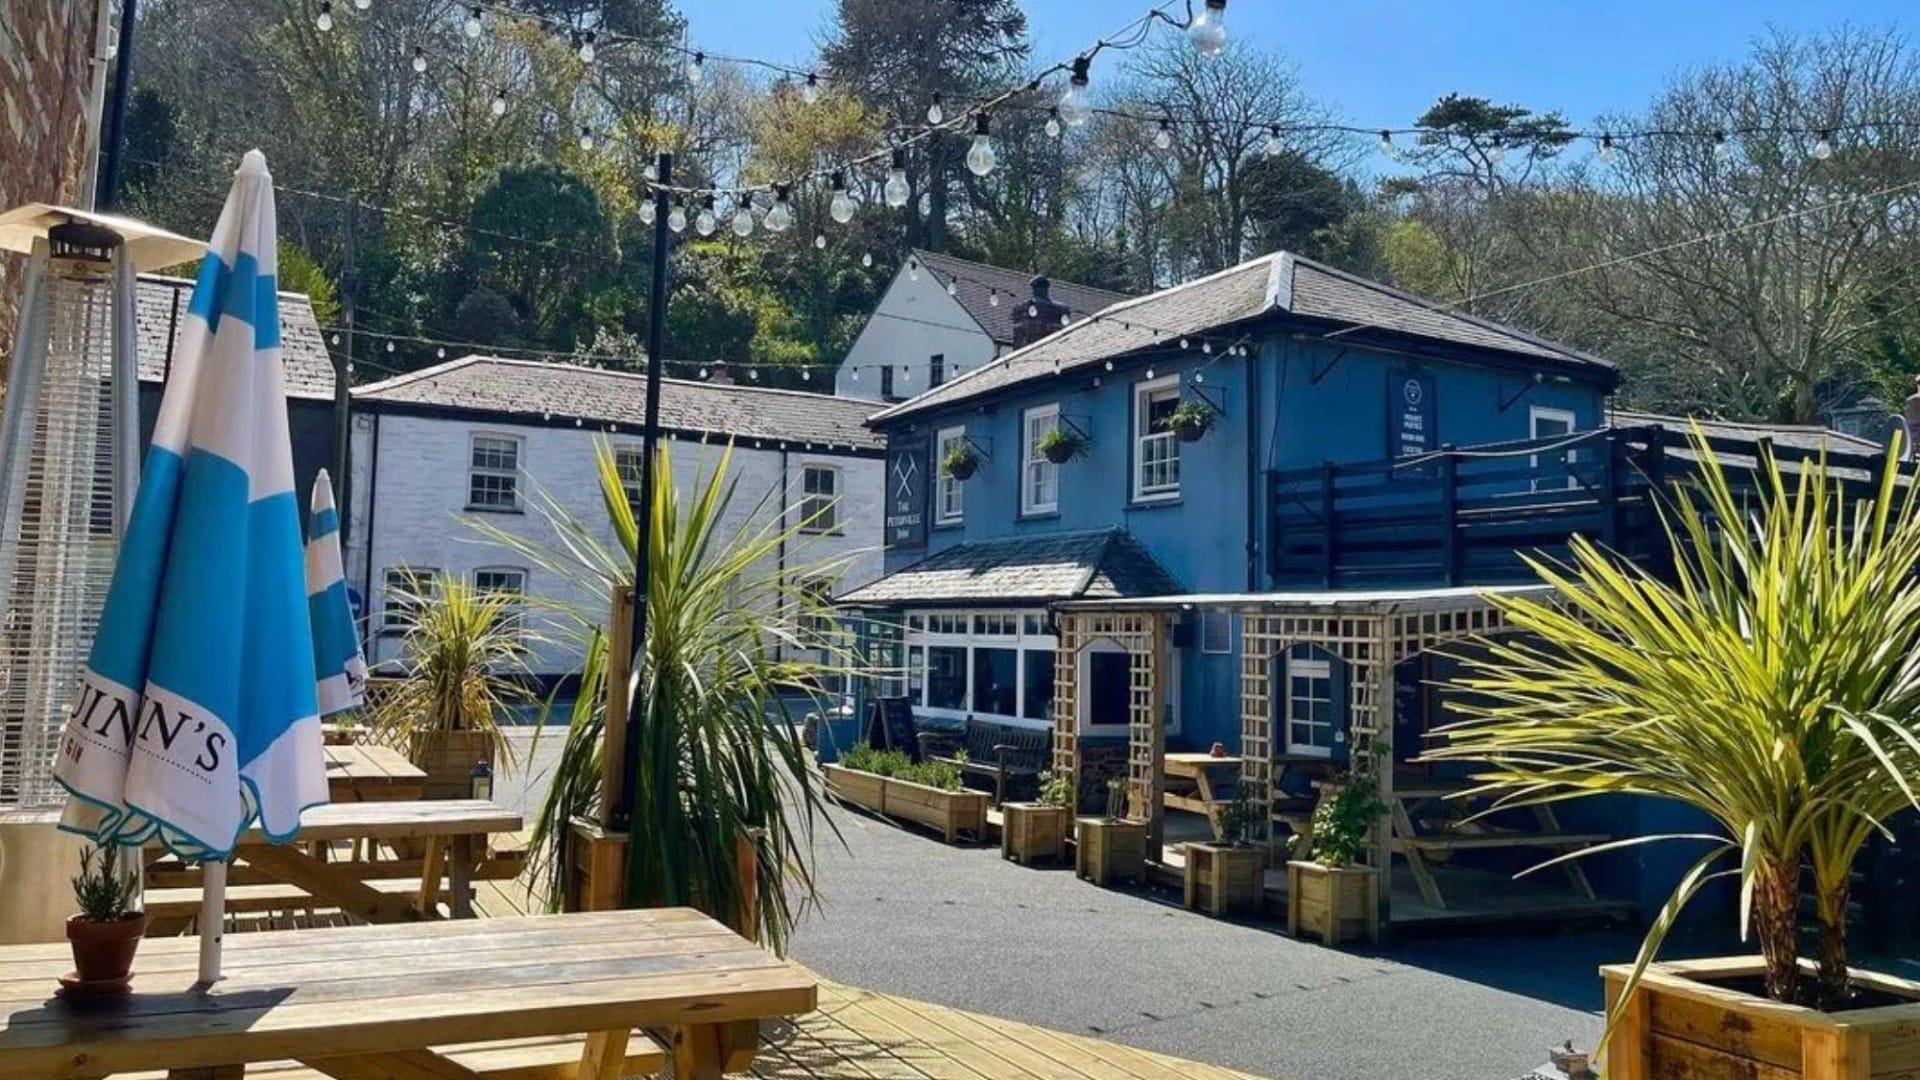 The traditional pub in a popular UK seaside village named the best in England